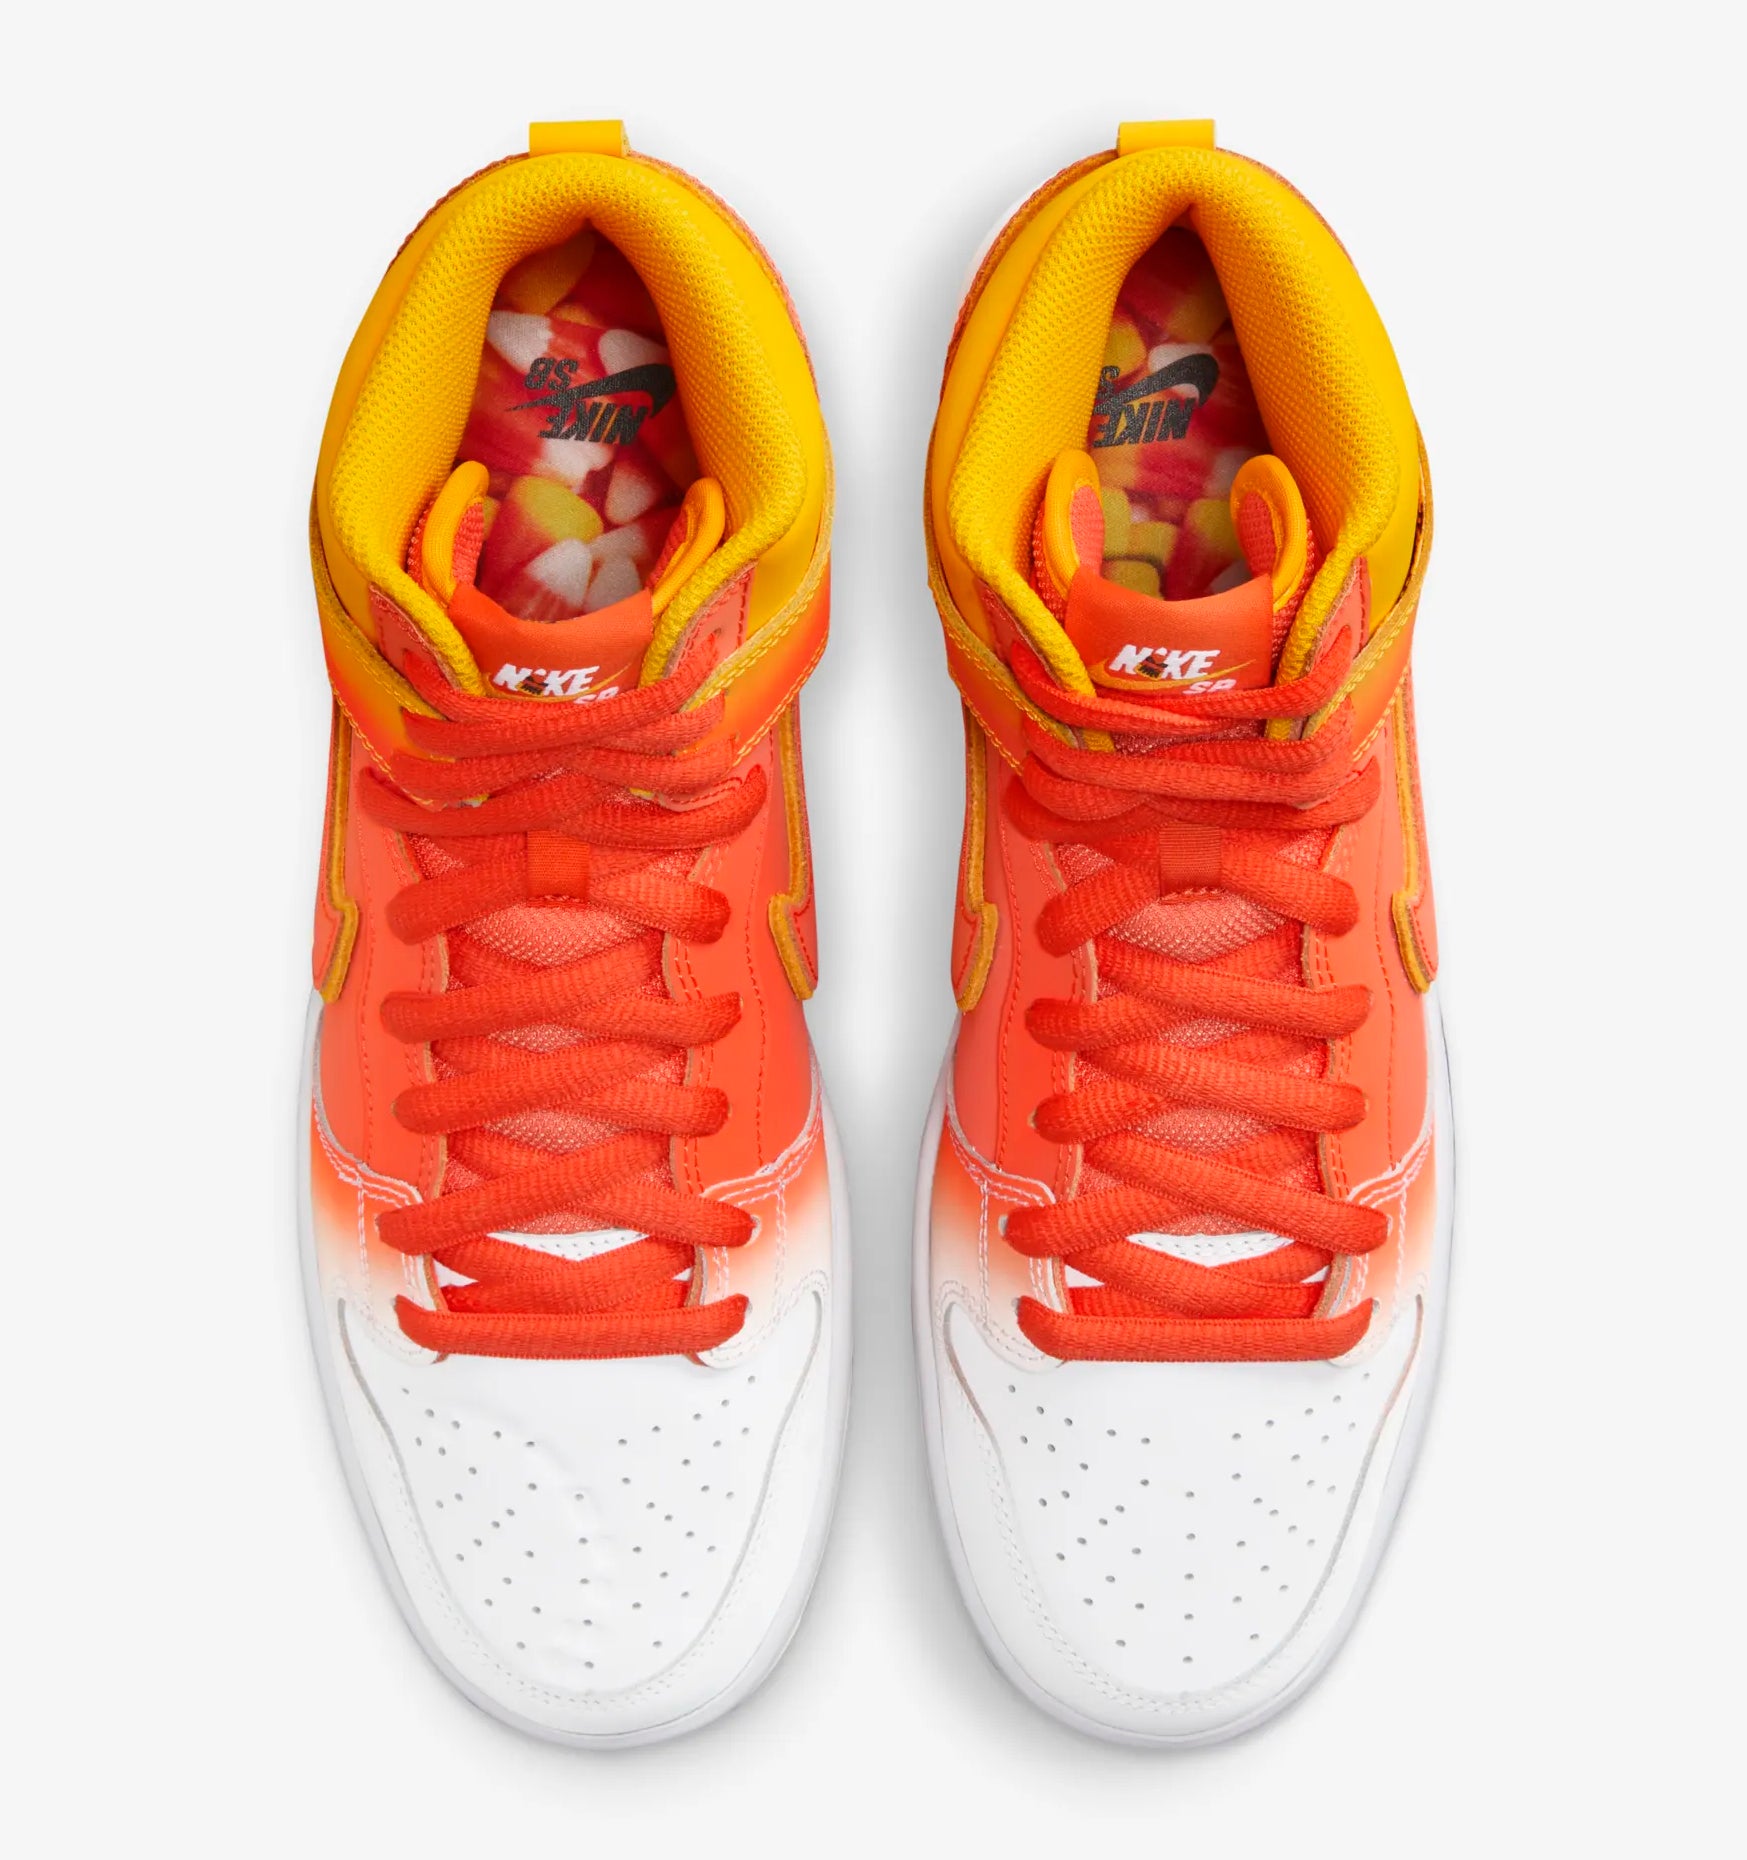 Nike SB Dunk High Sweet Tooth Candy Corn Release Date FN5107-700 Top